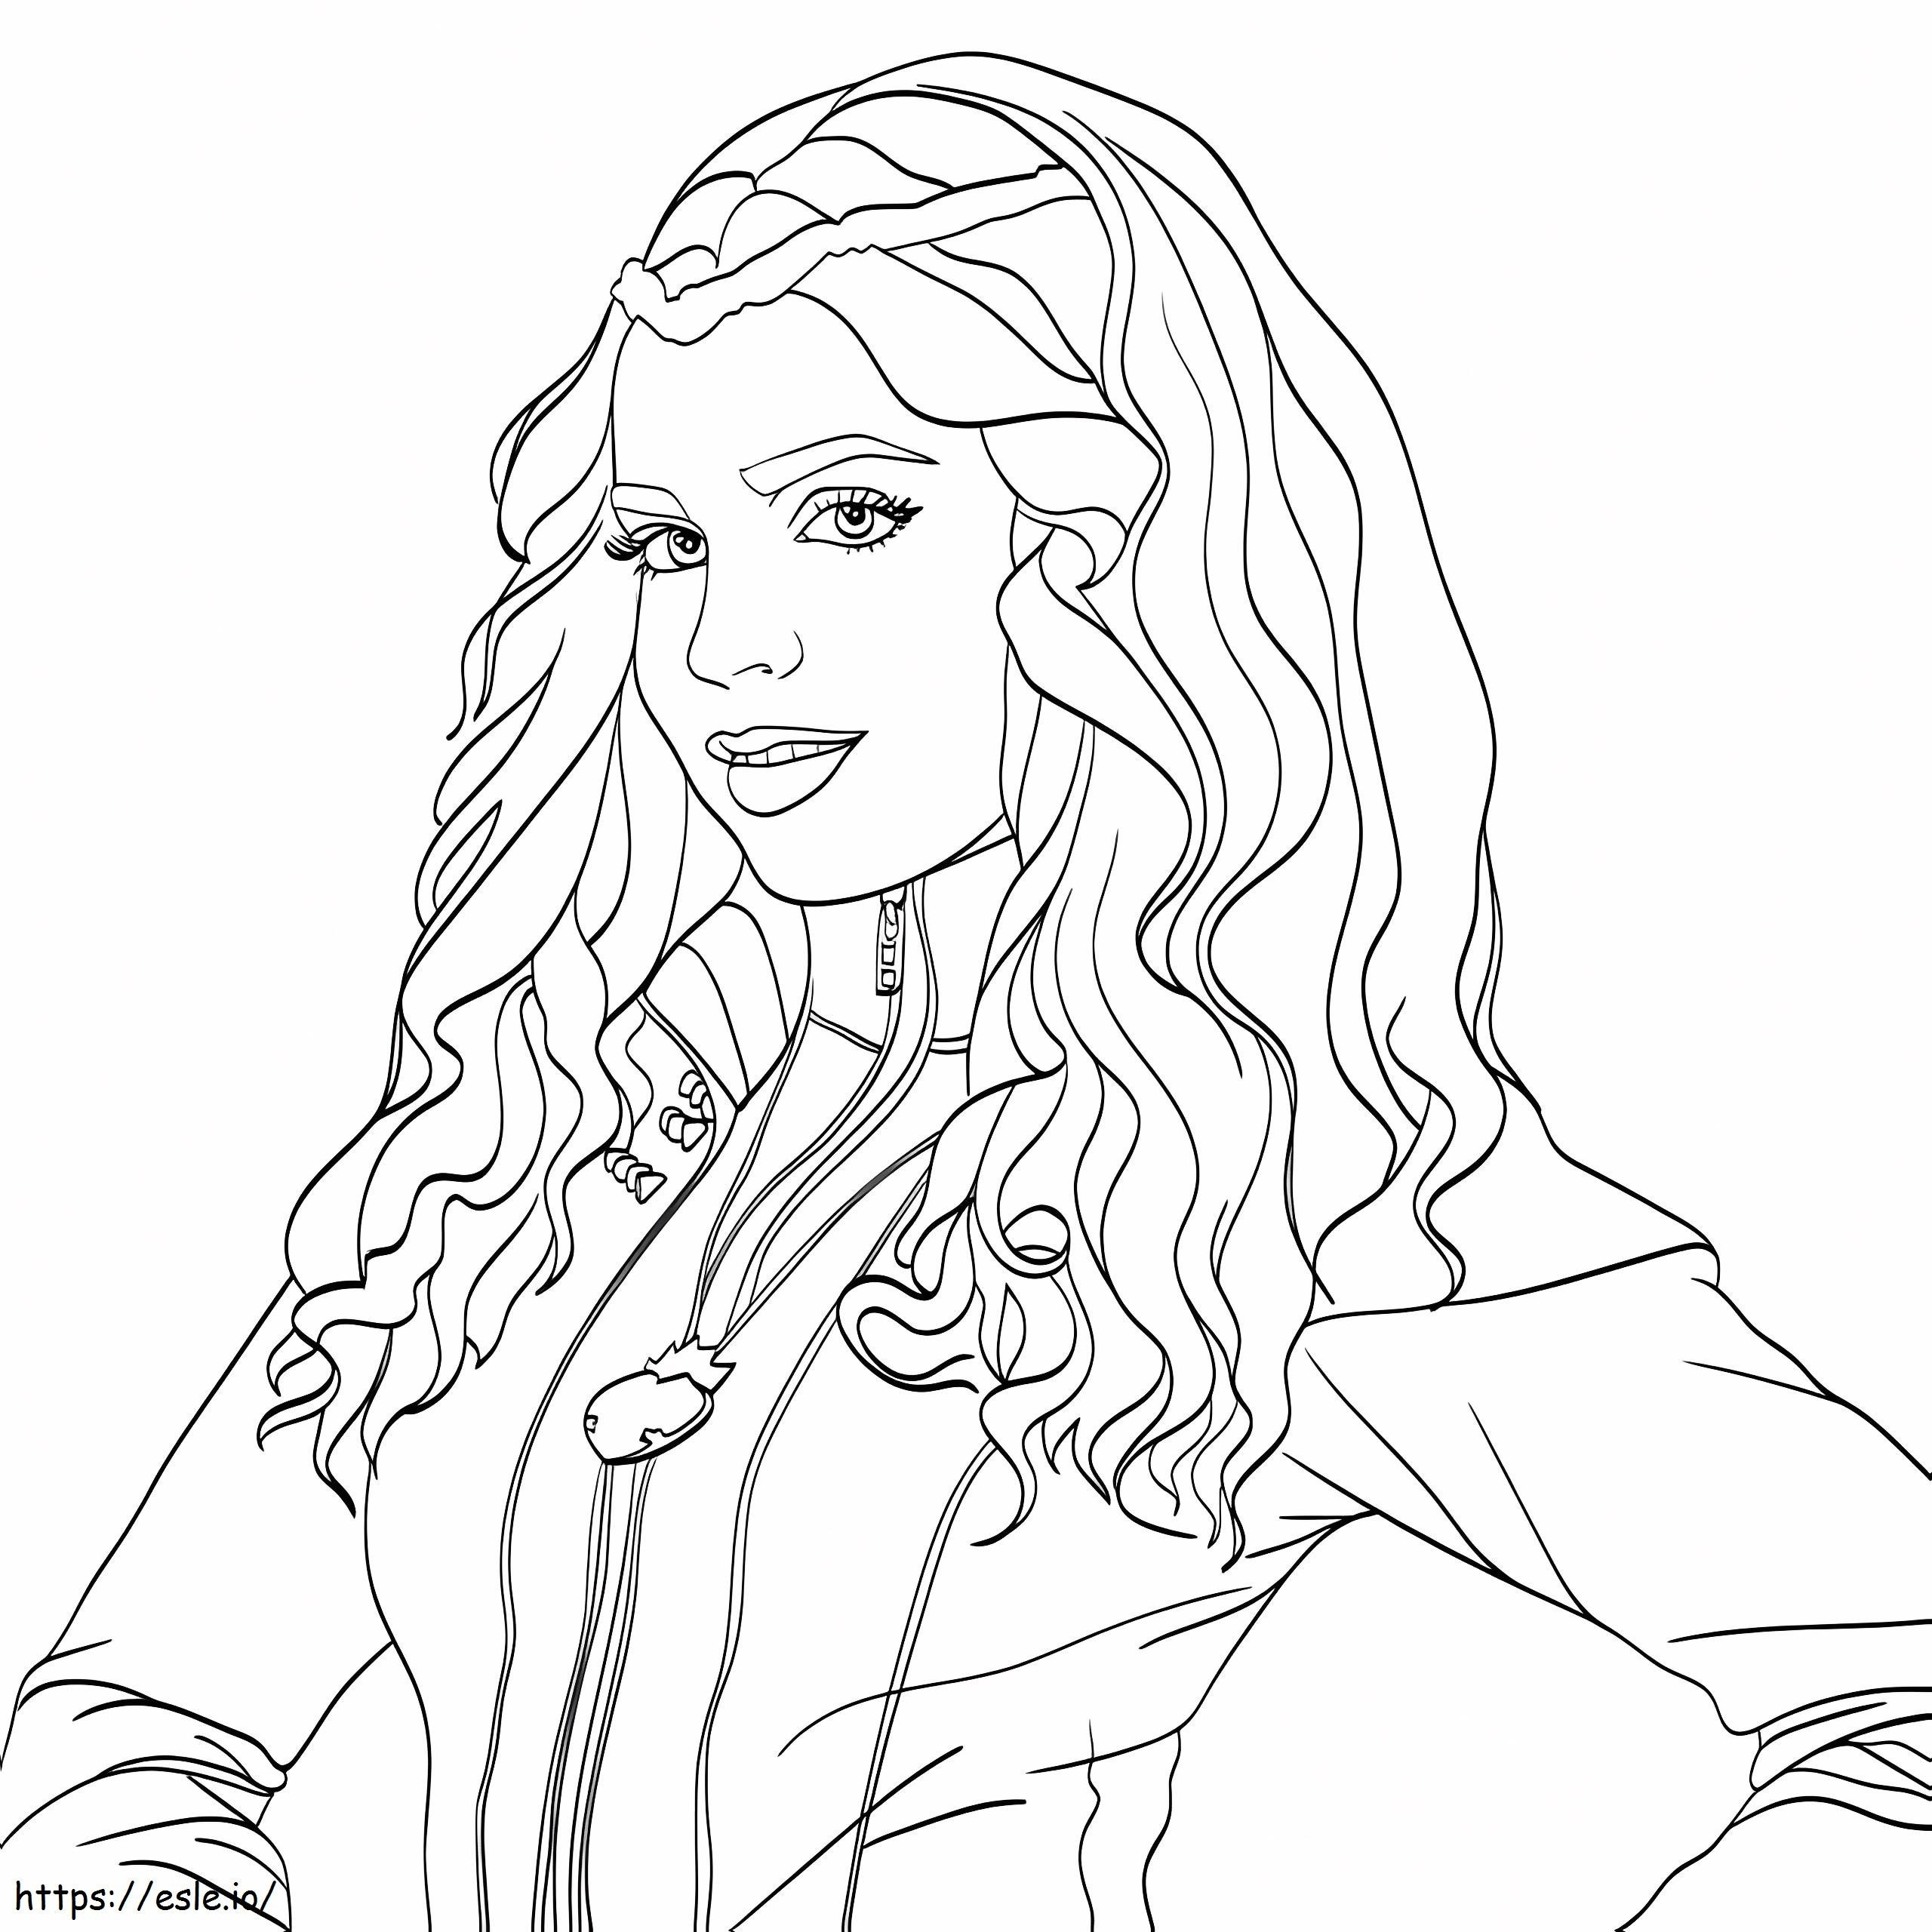 Descendents Characters Evie coloring page